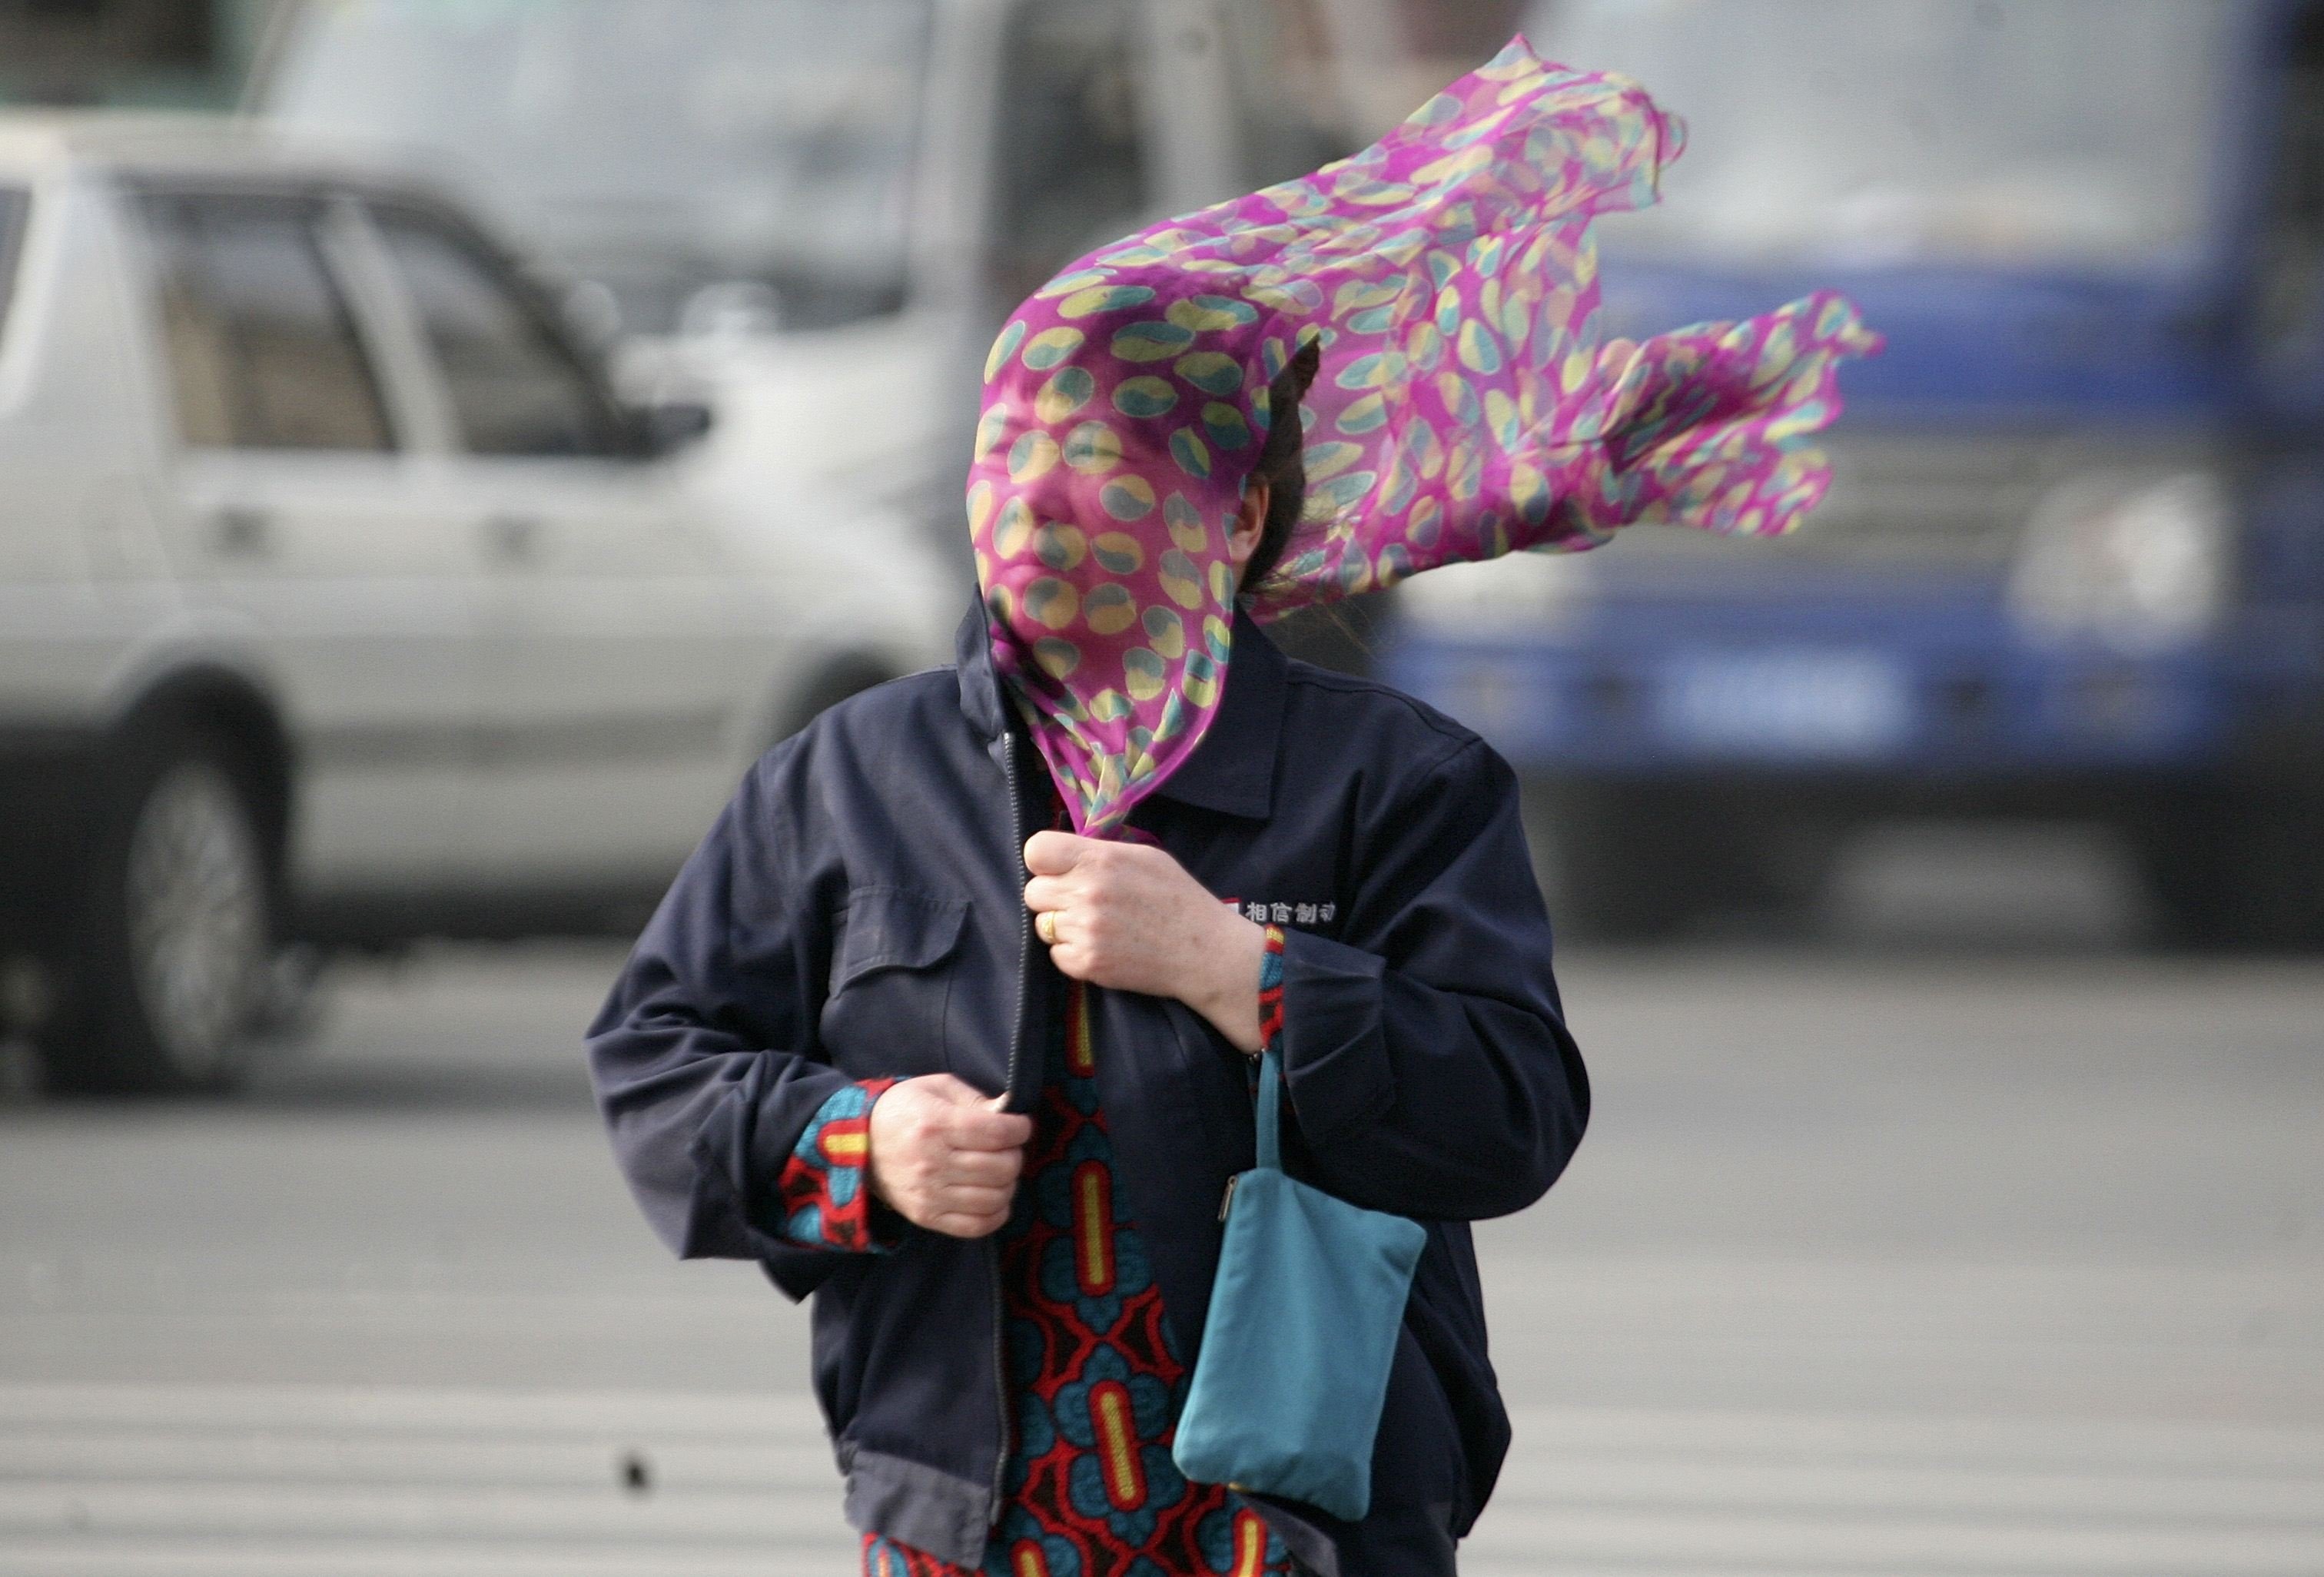 Apr. 14, 2014. A woman covers her face with a scarf as she crosses a street amid strong wind in Shenyang, Liaoning province. A blue alert for gale was issued in Shenyang on Monday, Xinhua News Agency reported.